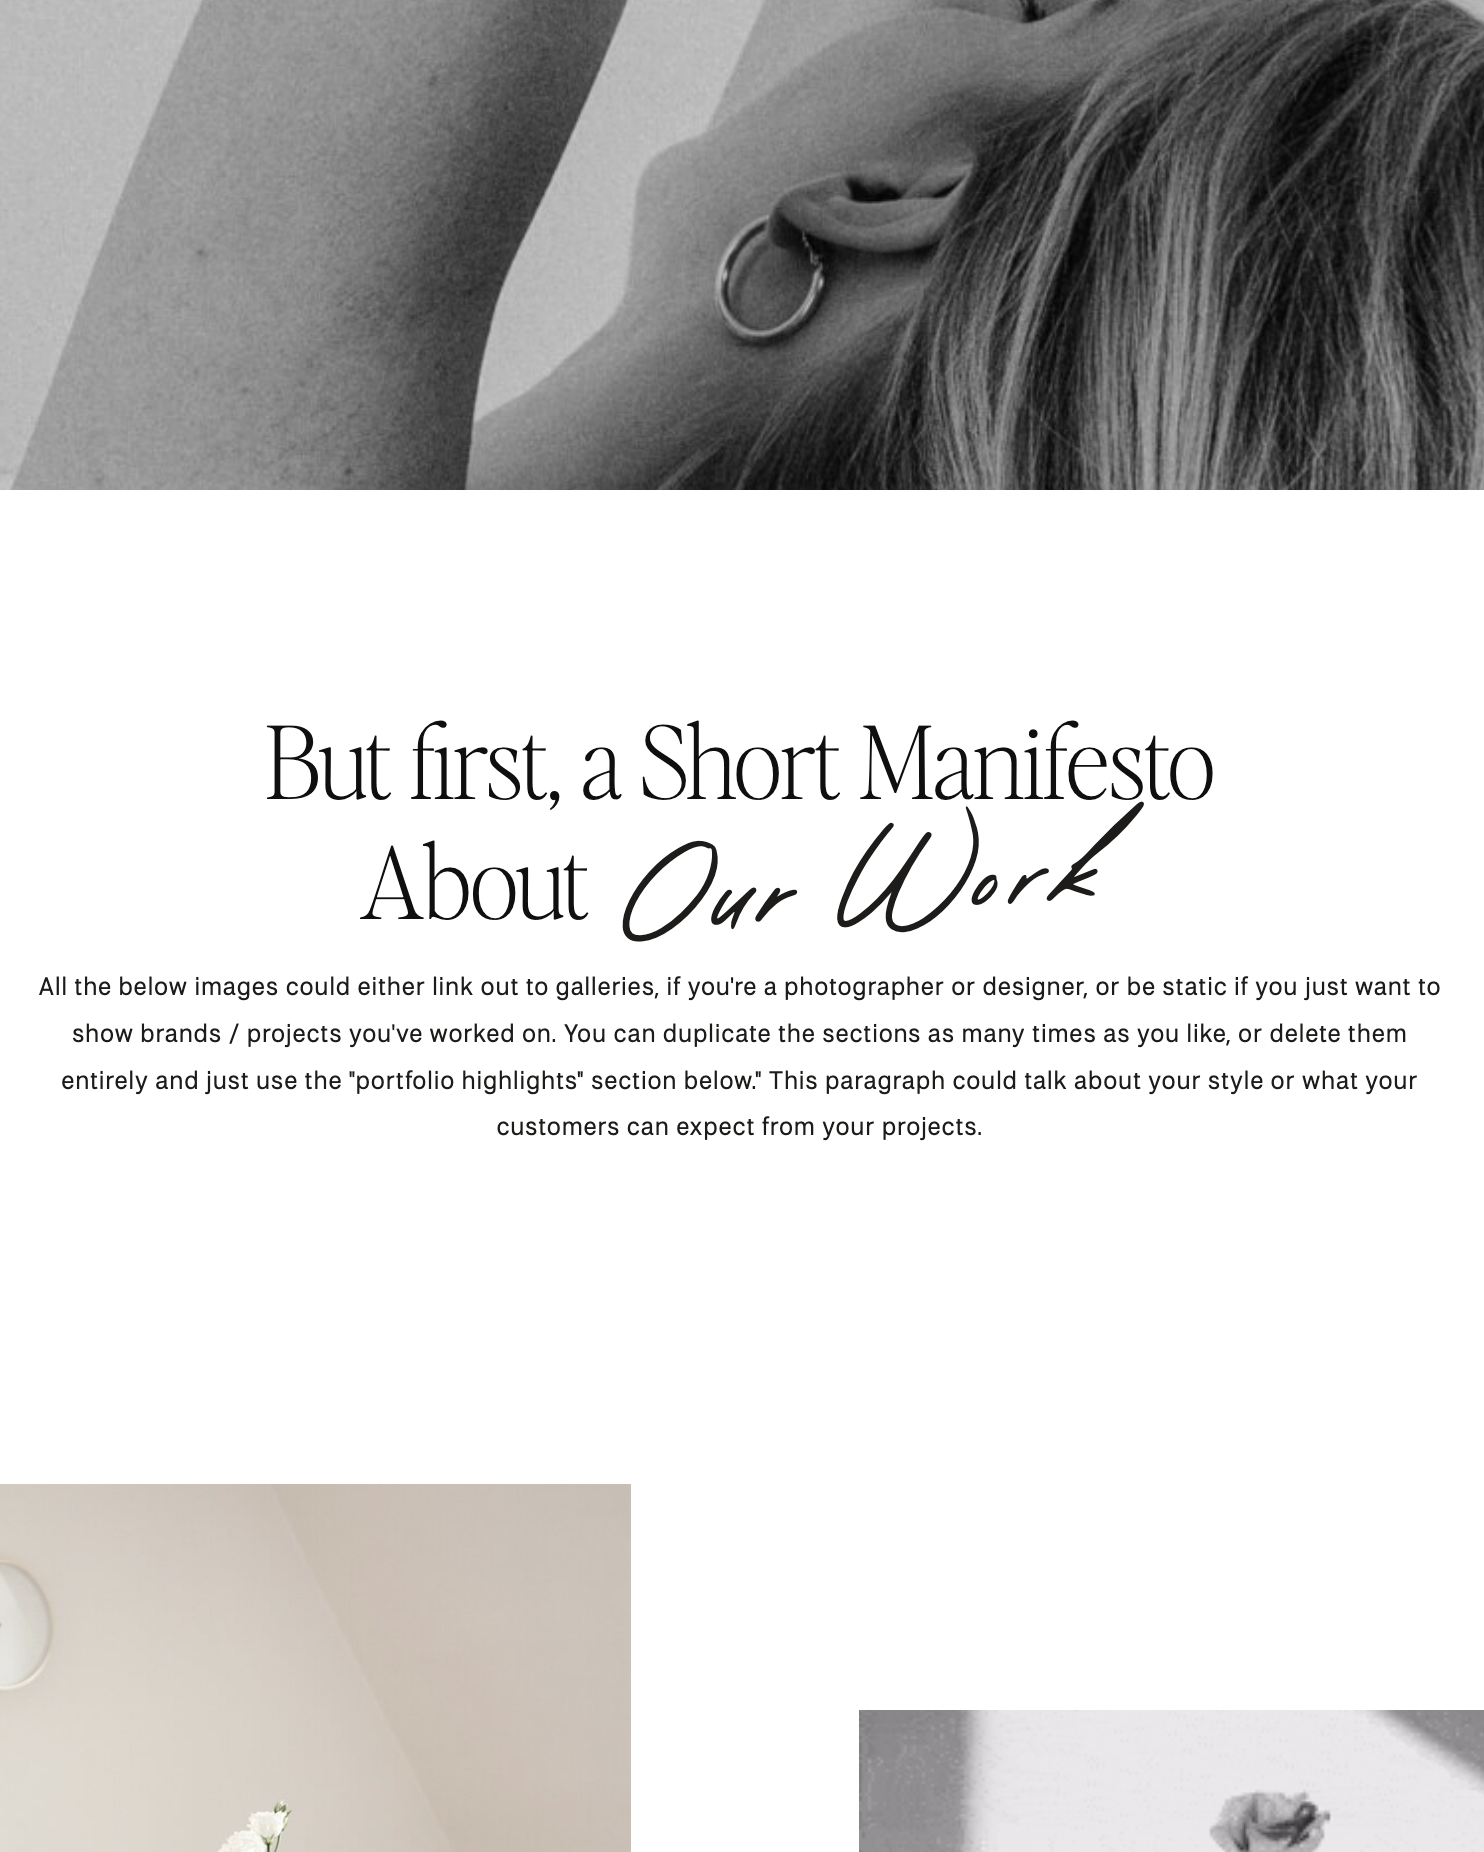 Jen Wagner Co. font pairing Paso Robles and Editor's Note serif font for websites and logos